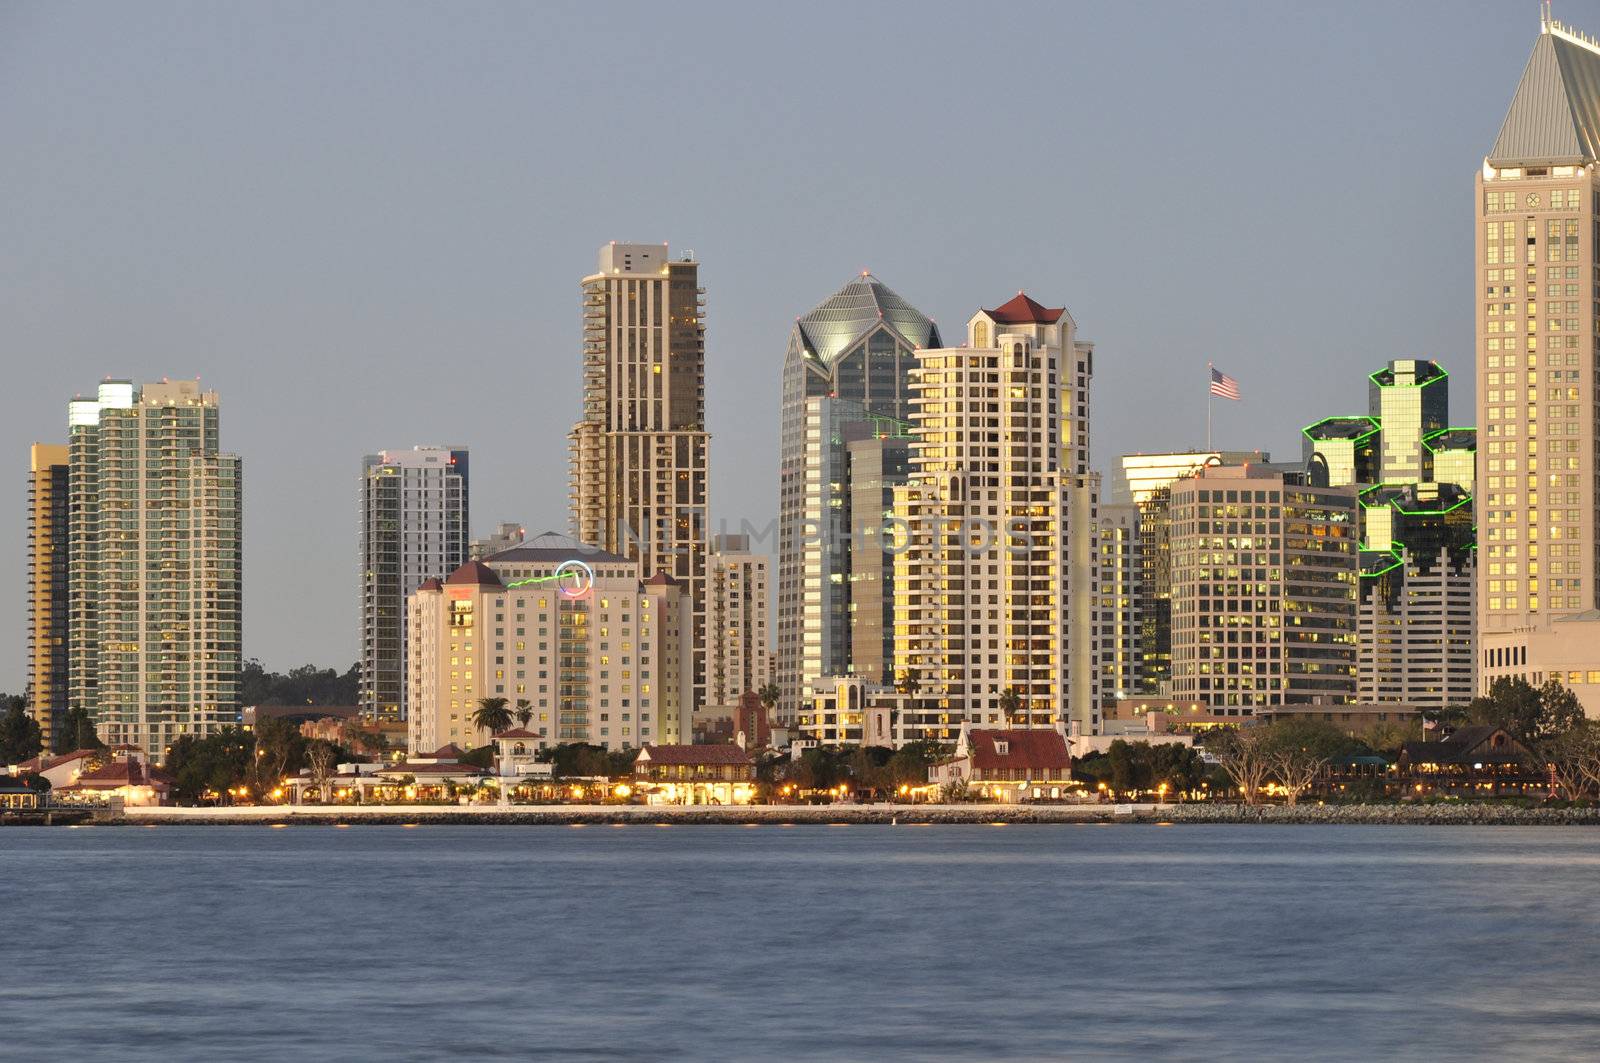 View of the San Diego waterfront as dusk falls on the city.